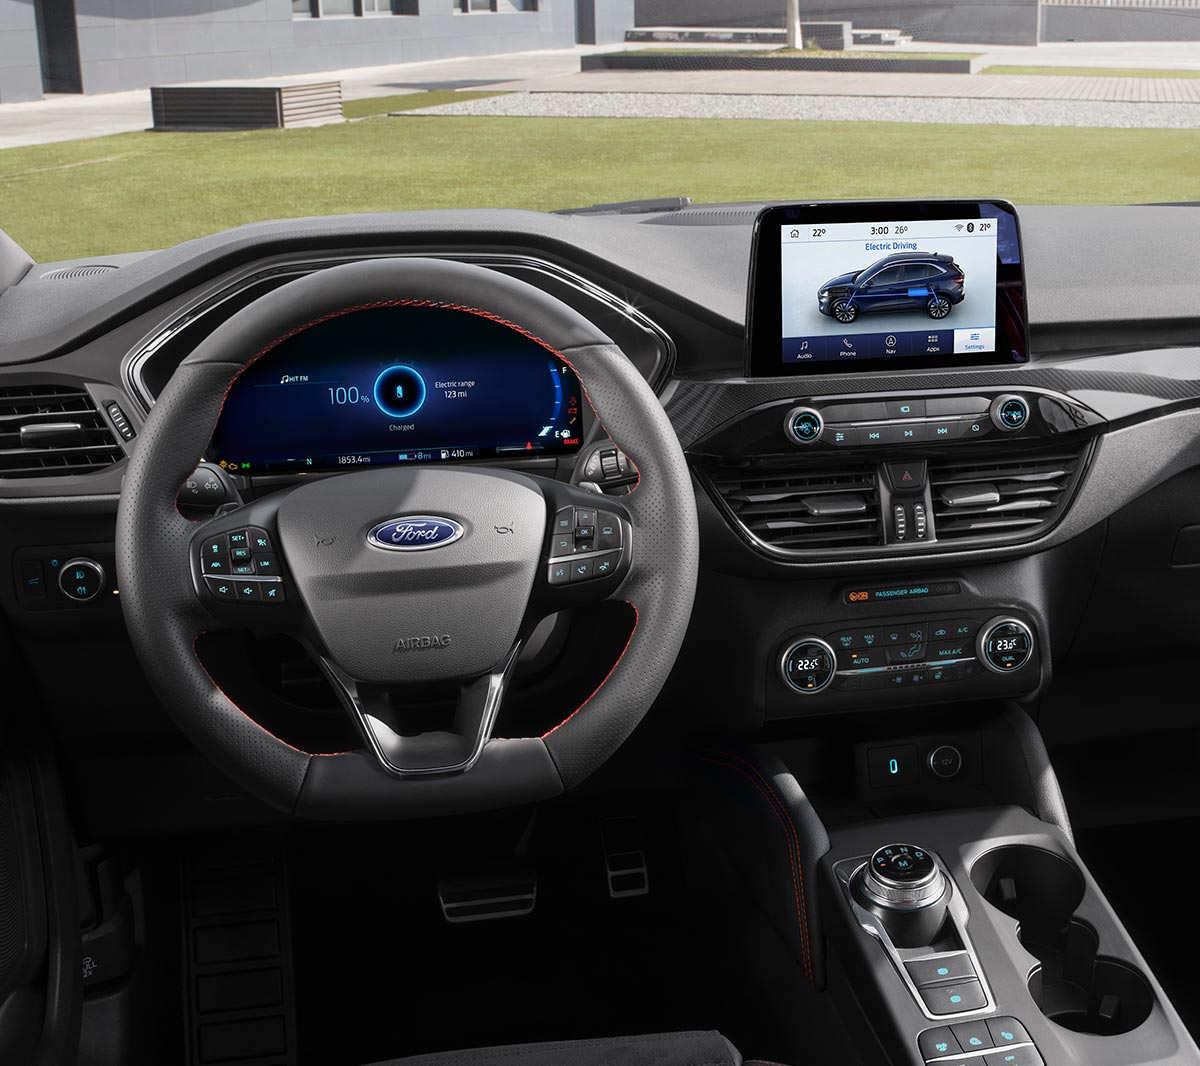 All New Ford Kuga interior with steering wheel and SYNC3 